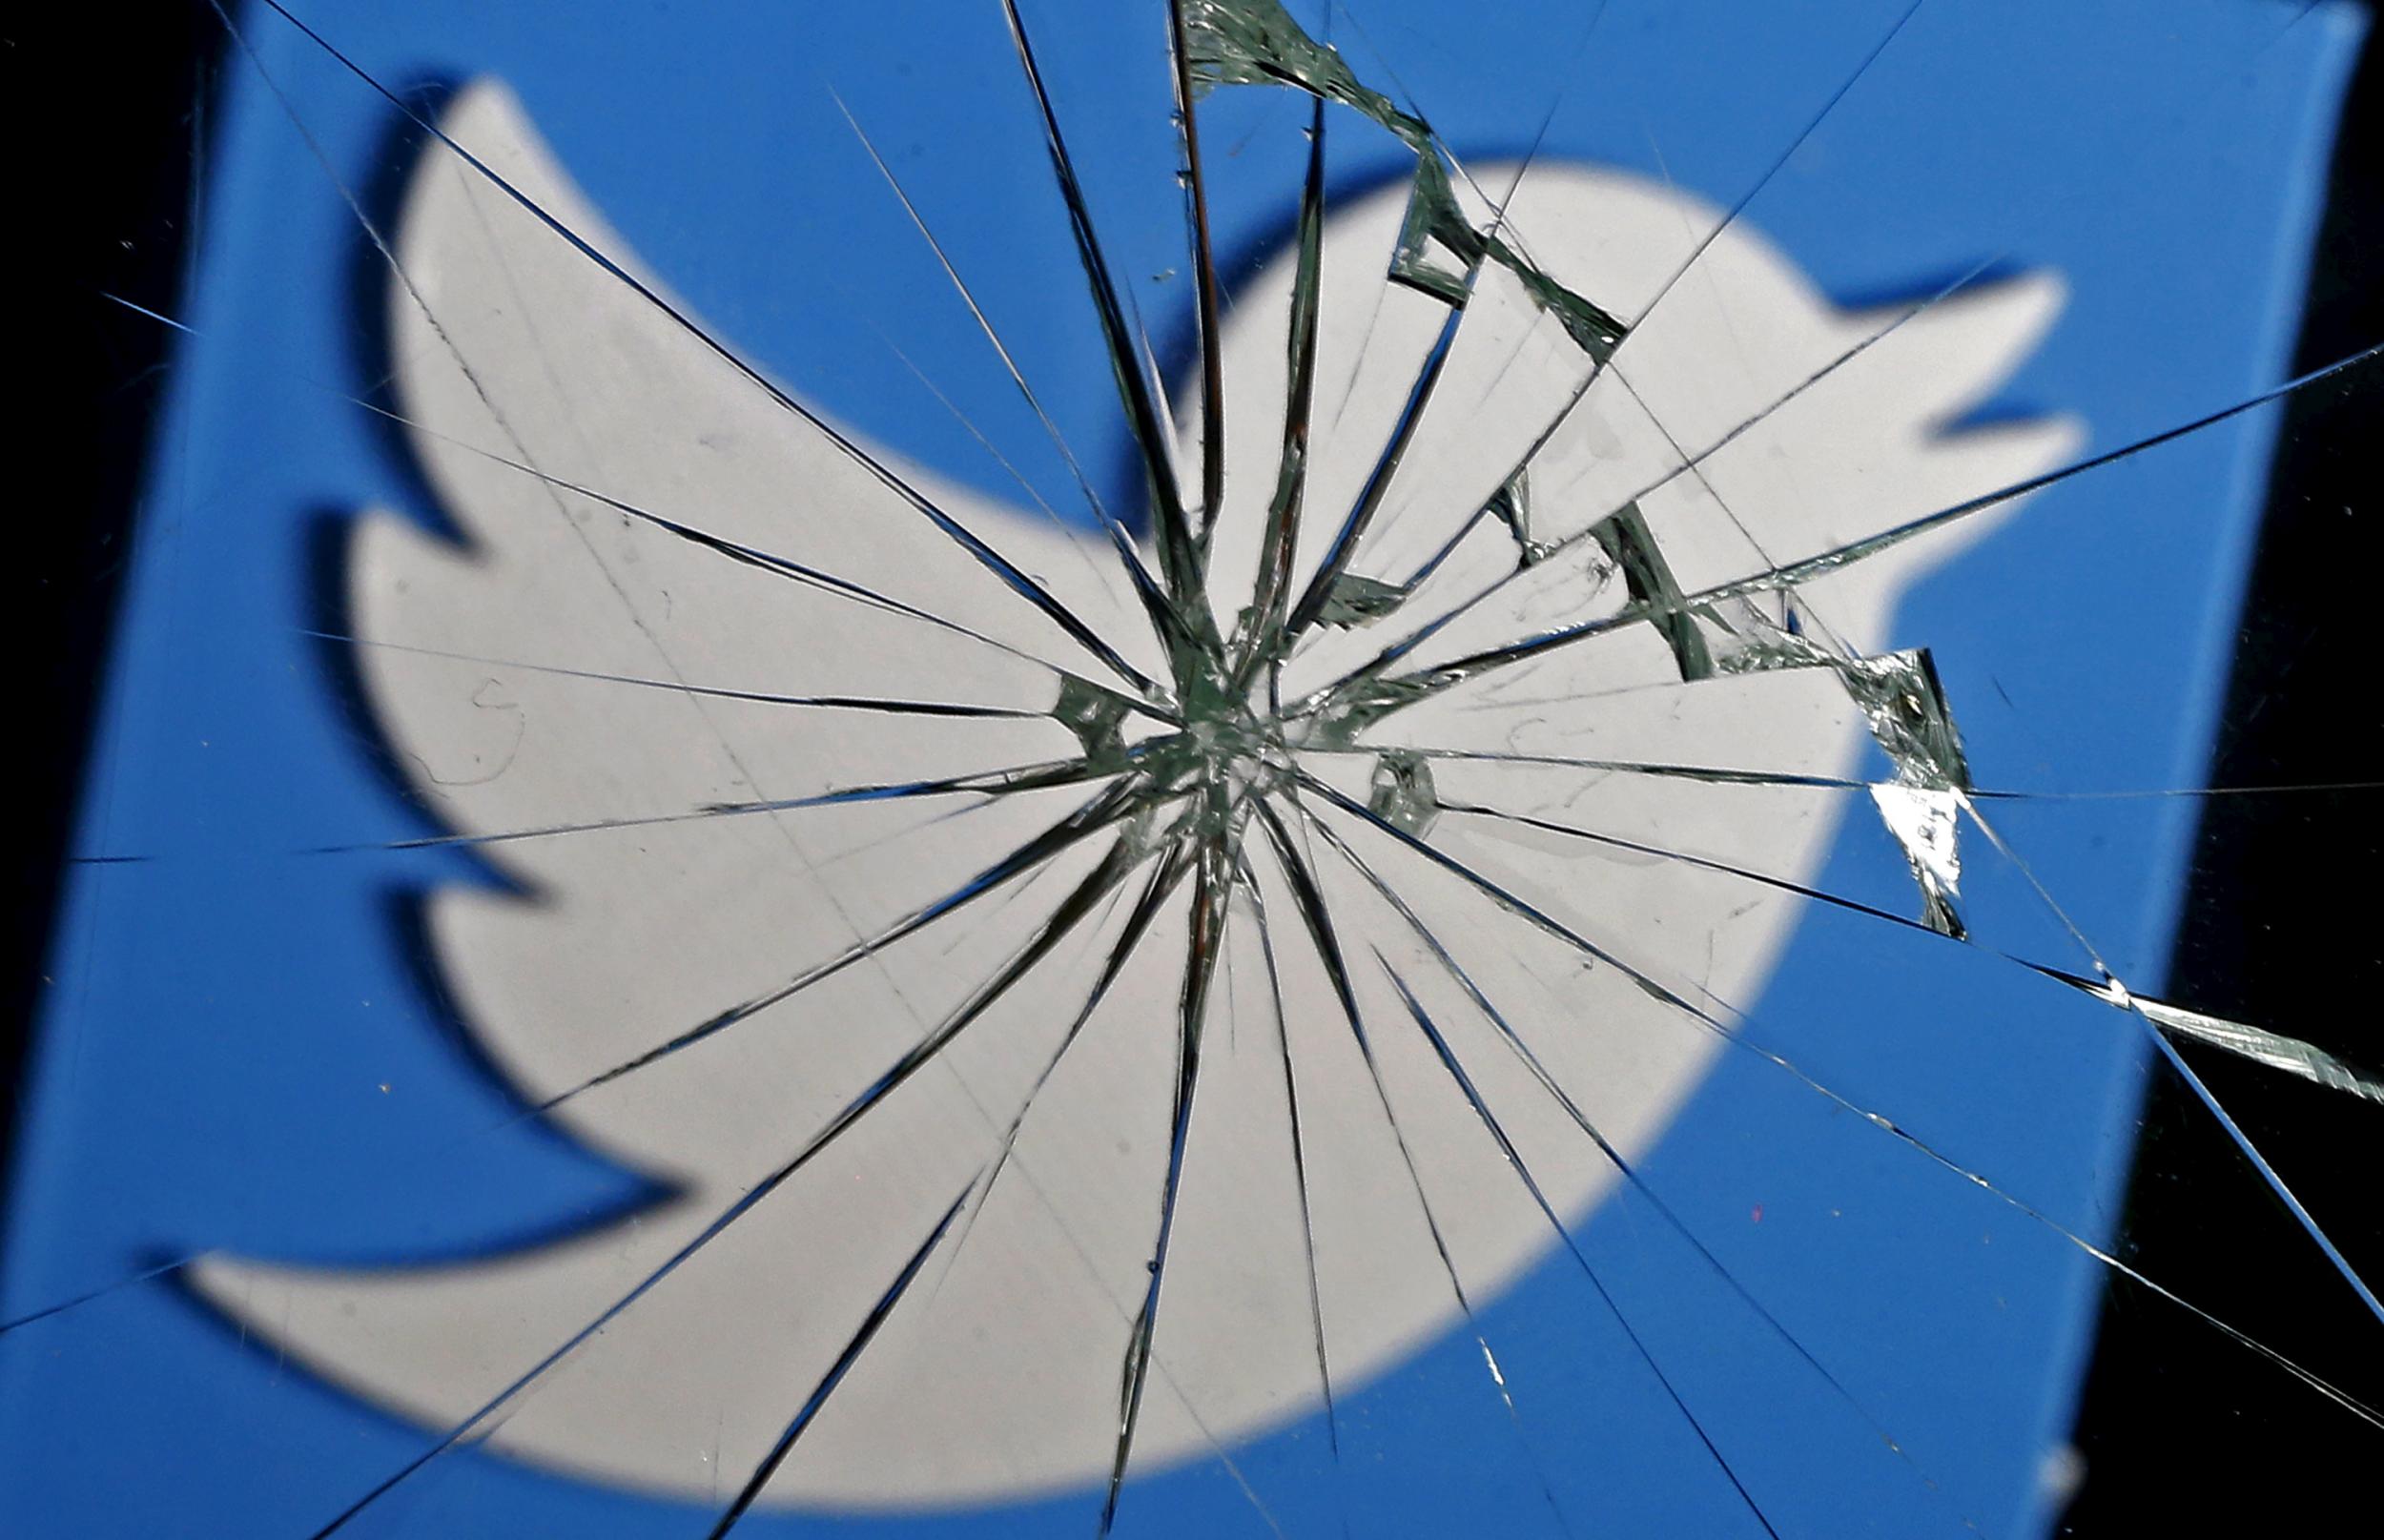 Twitter told all 330 million of its users to change their passwords following a 'bug'.